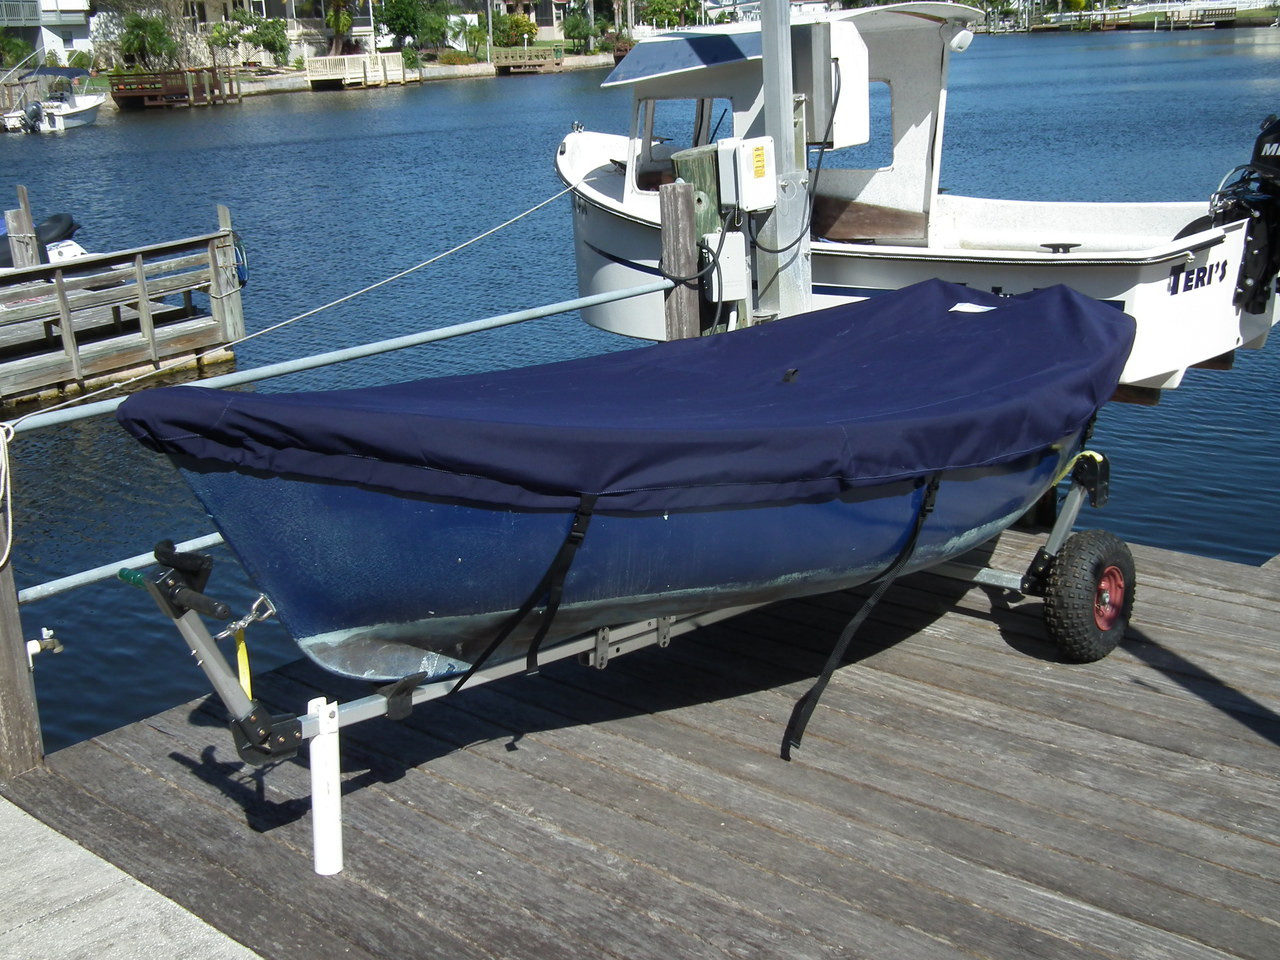 Bauer 10 Sailboat Top Cover - Polyester Navy Blue Deck Cover. Made in America by SLO Sail and Canvas. 